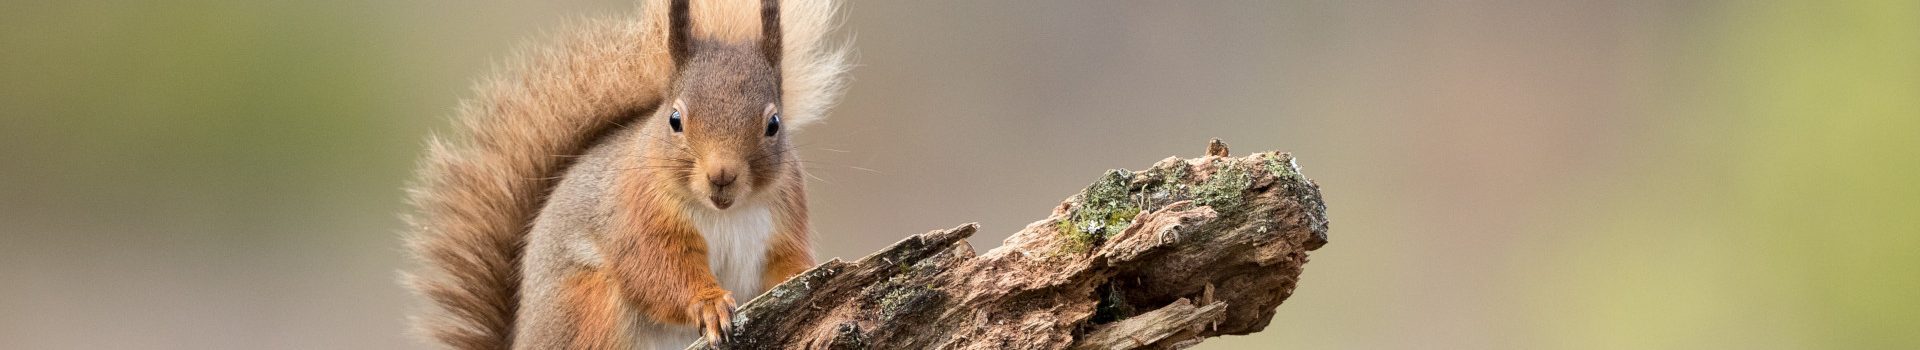 Red squirrel perched on a branch, Scotland